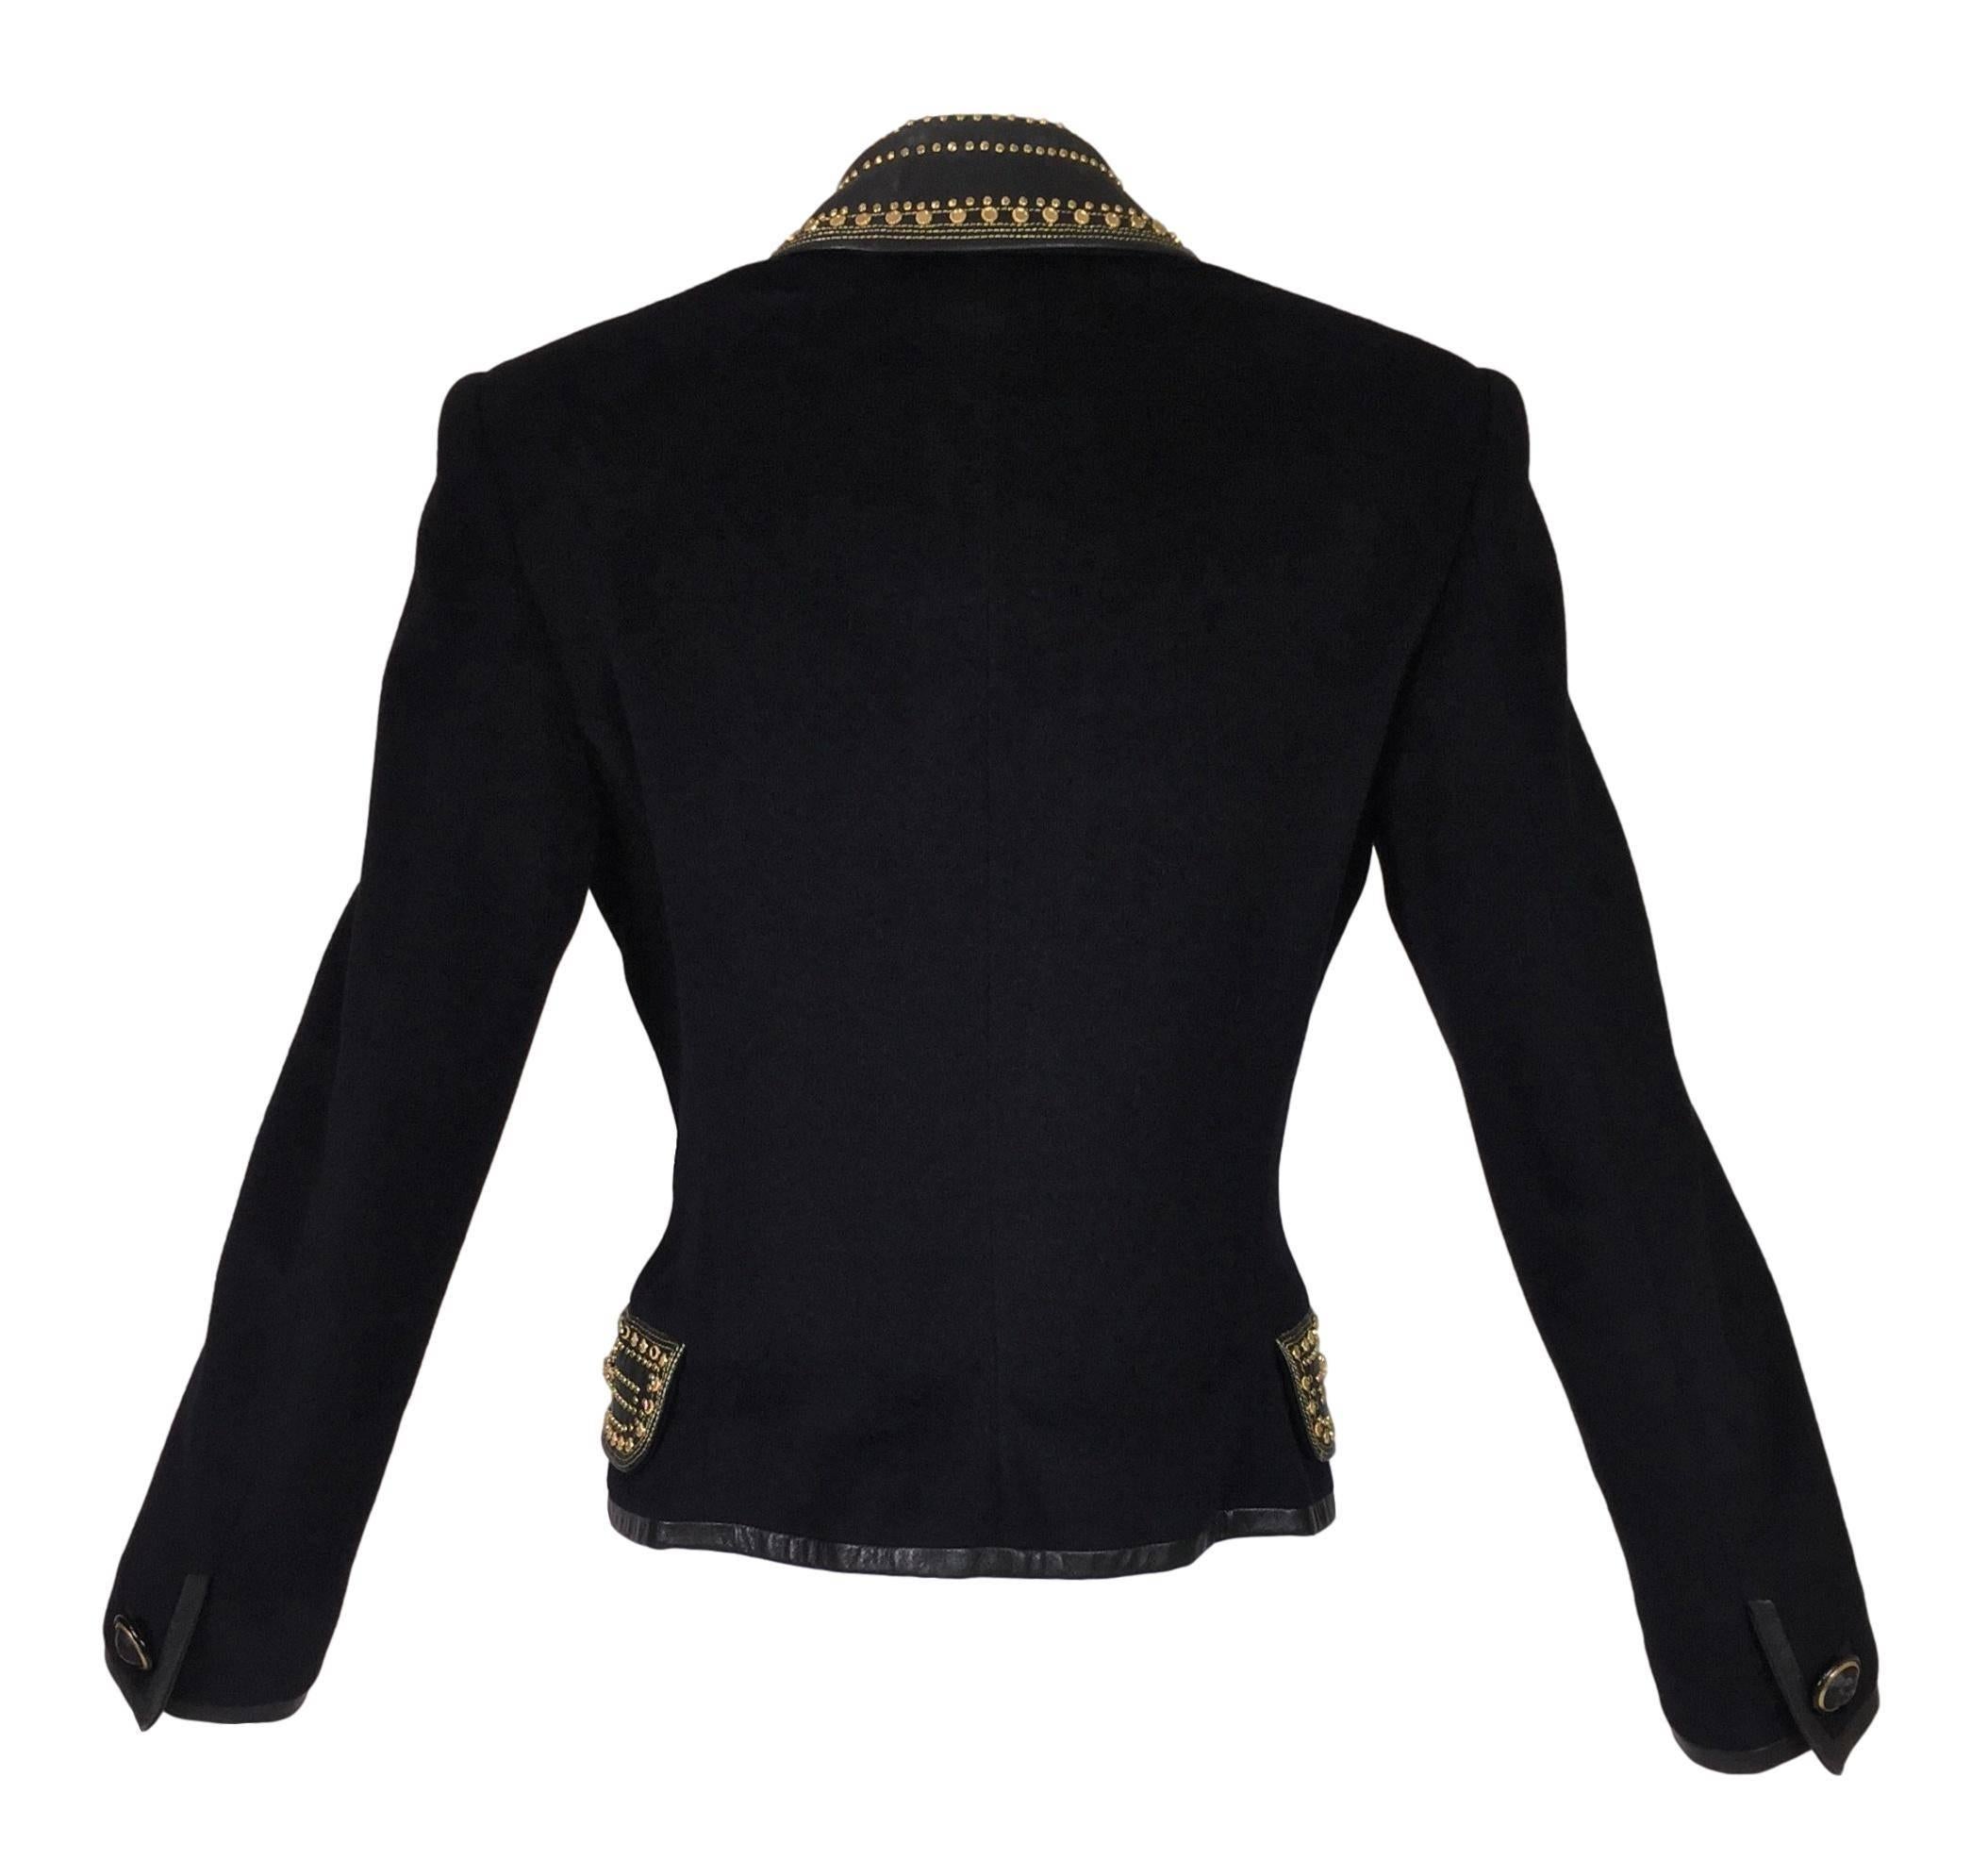 Women's F/W 1992 Gianni Versace Couture Studded Bondage Black Fitted Wool Jacket 40